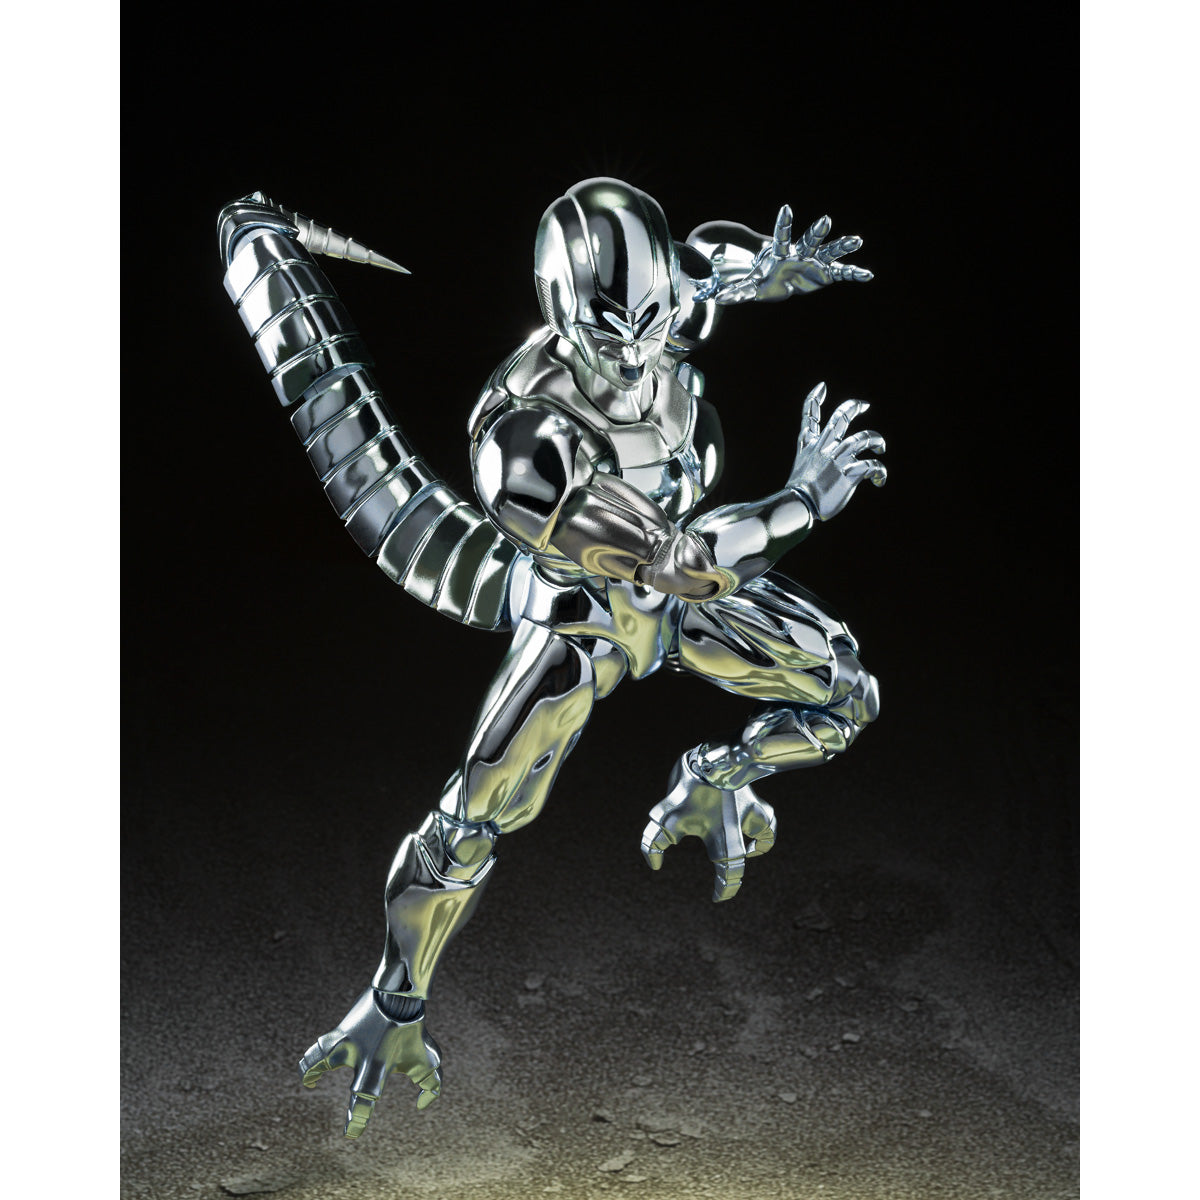 Bandai - S.H.Figuarts - Dragon Ball Z: The Return of Cooler - Metal Cooler - Marvelous Toys